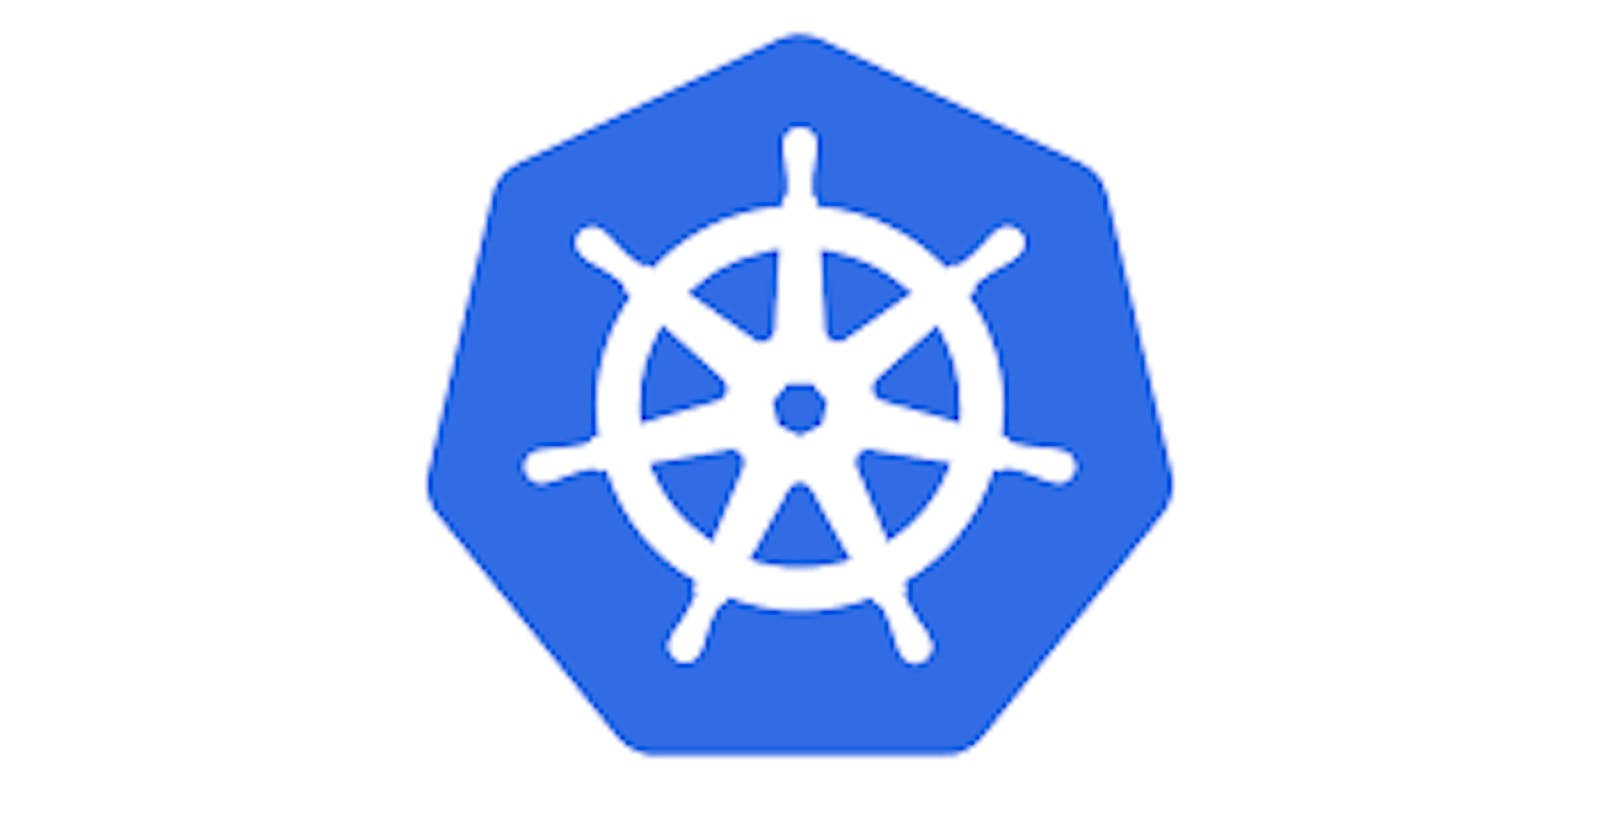 Kubernetes: The Container Orchestration Platform